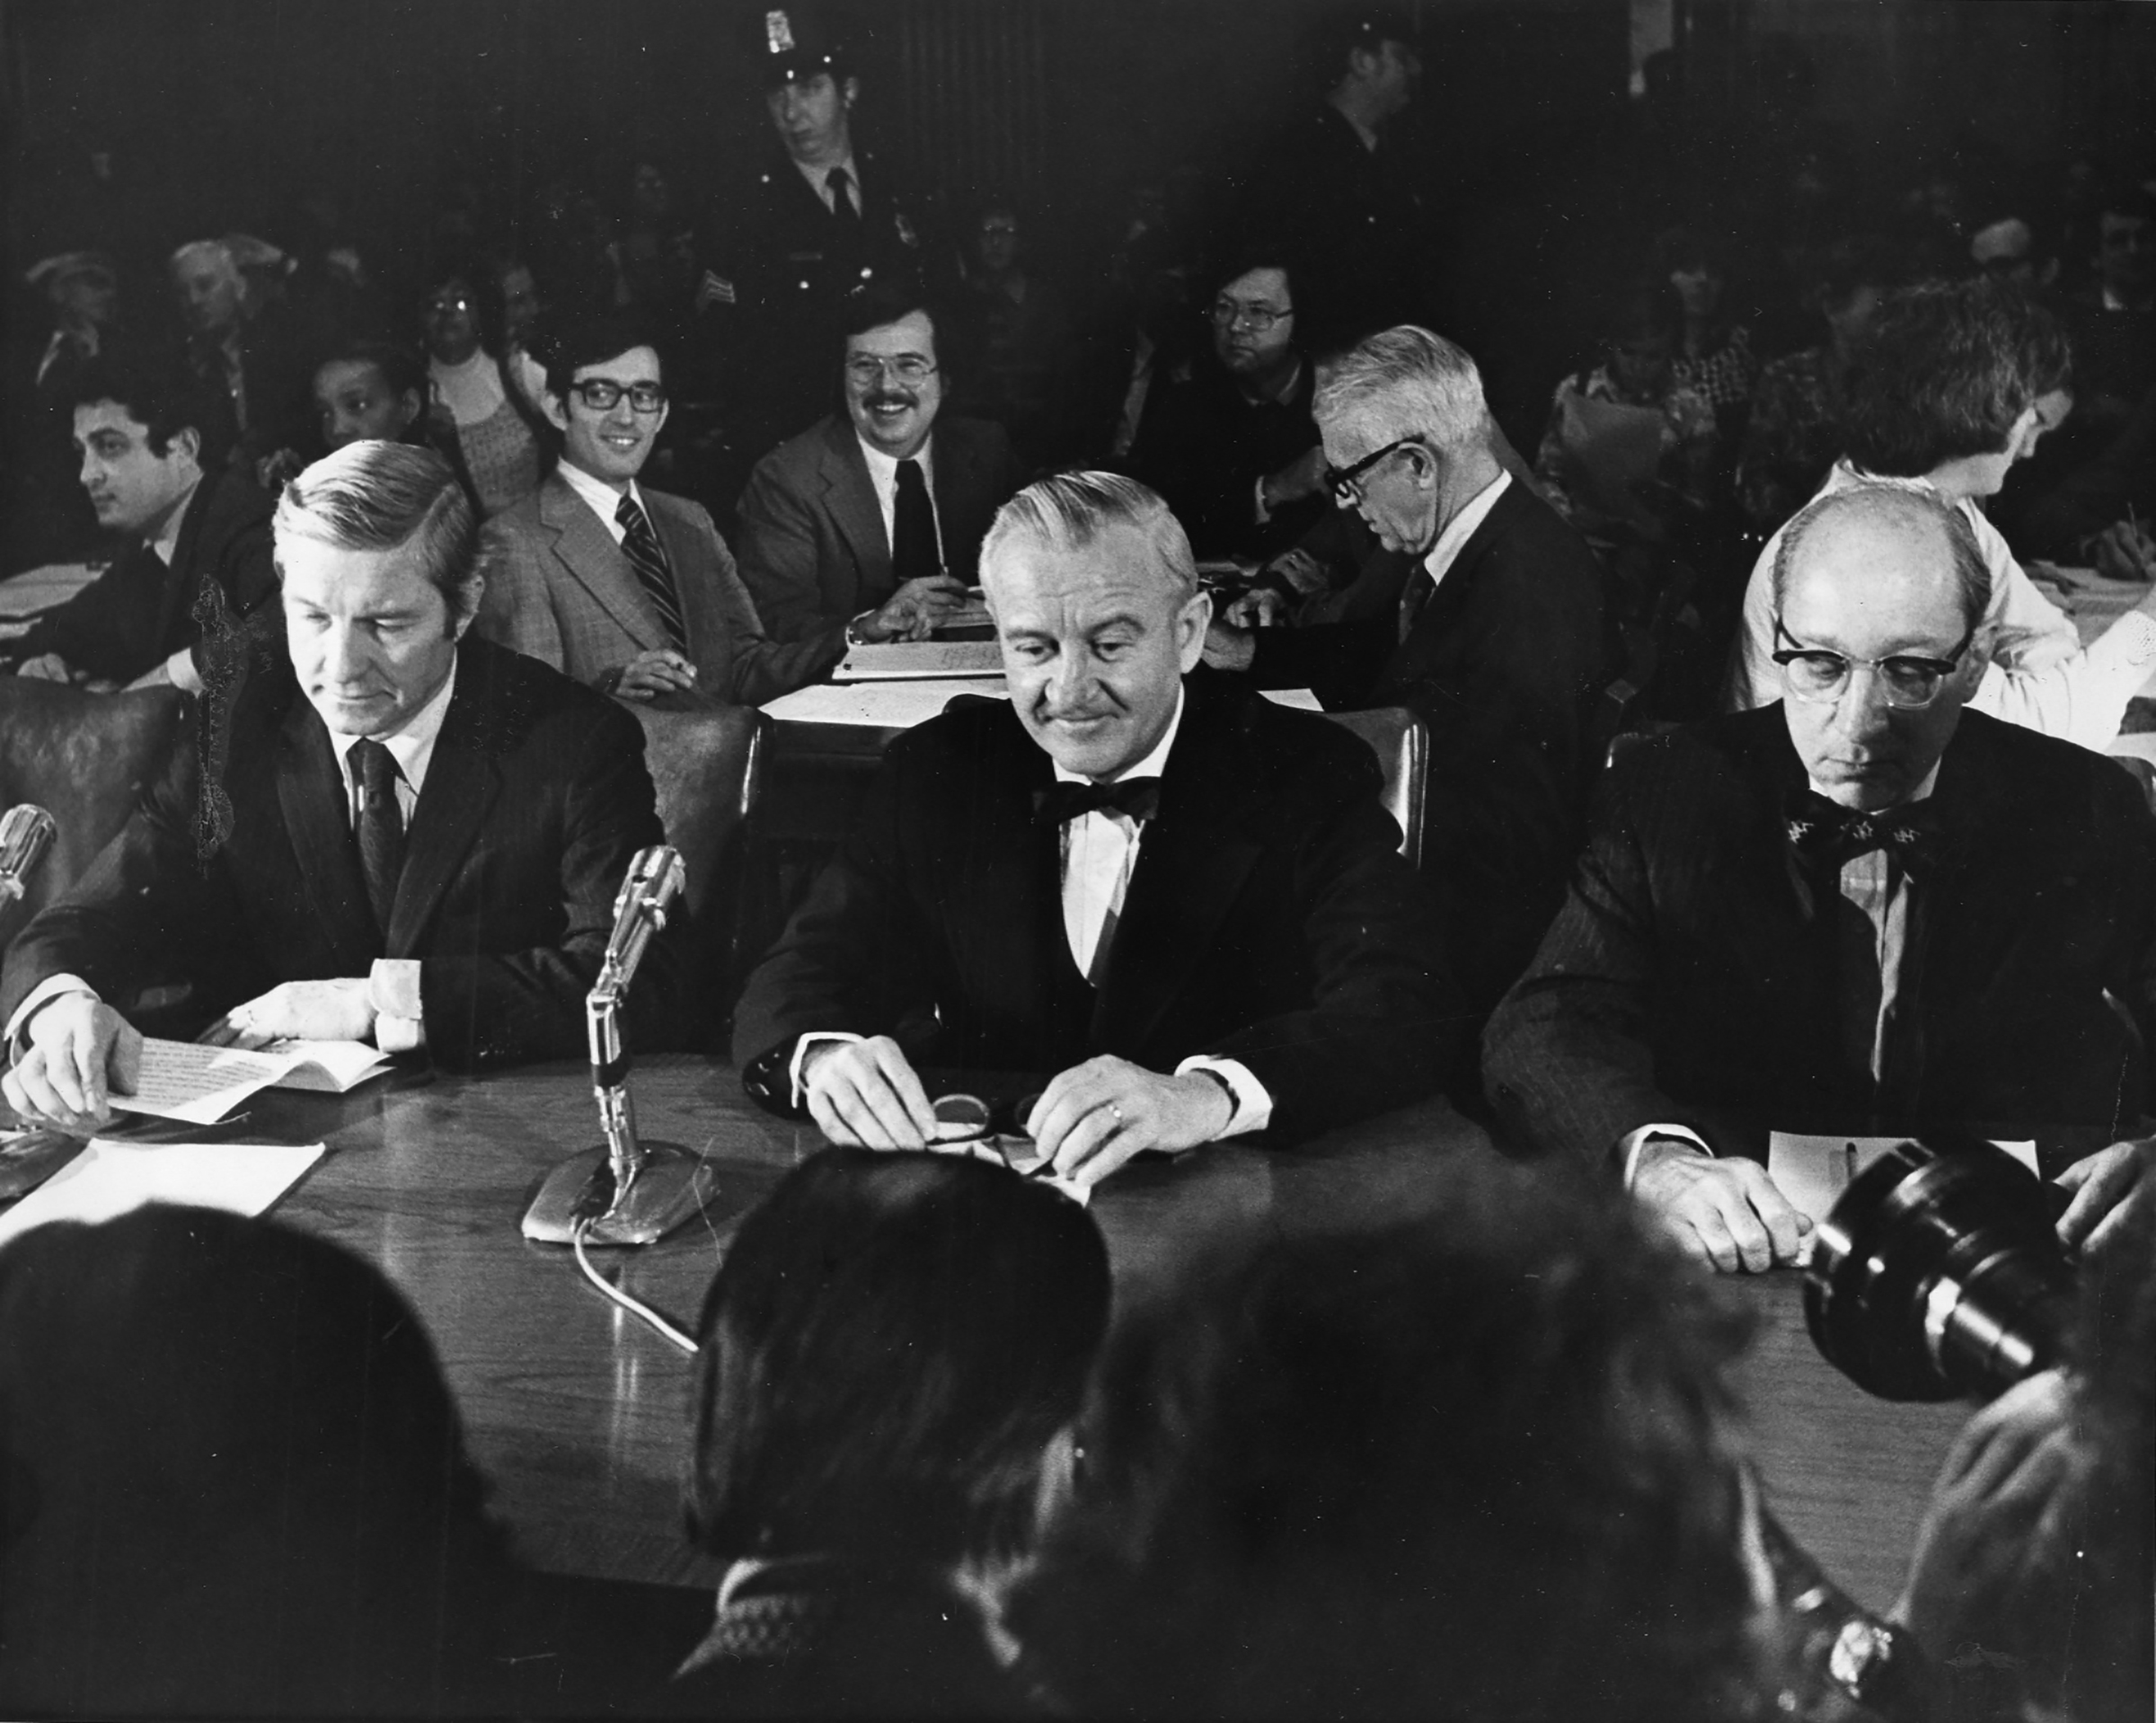 Supreme Court nominee John Paul Stevens is flanked by Sen. Charles Percy, left, and Attorney General Edward Levi at a confirmation hearing before the Senate Judiciary Committee in Washington, D.C., on Dec. 8, 1975. (Douglas Chevalier—The Washington Post/Getty Images)